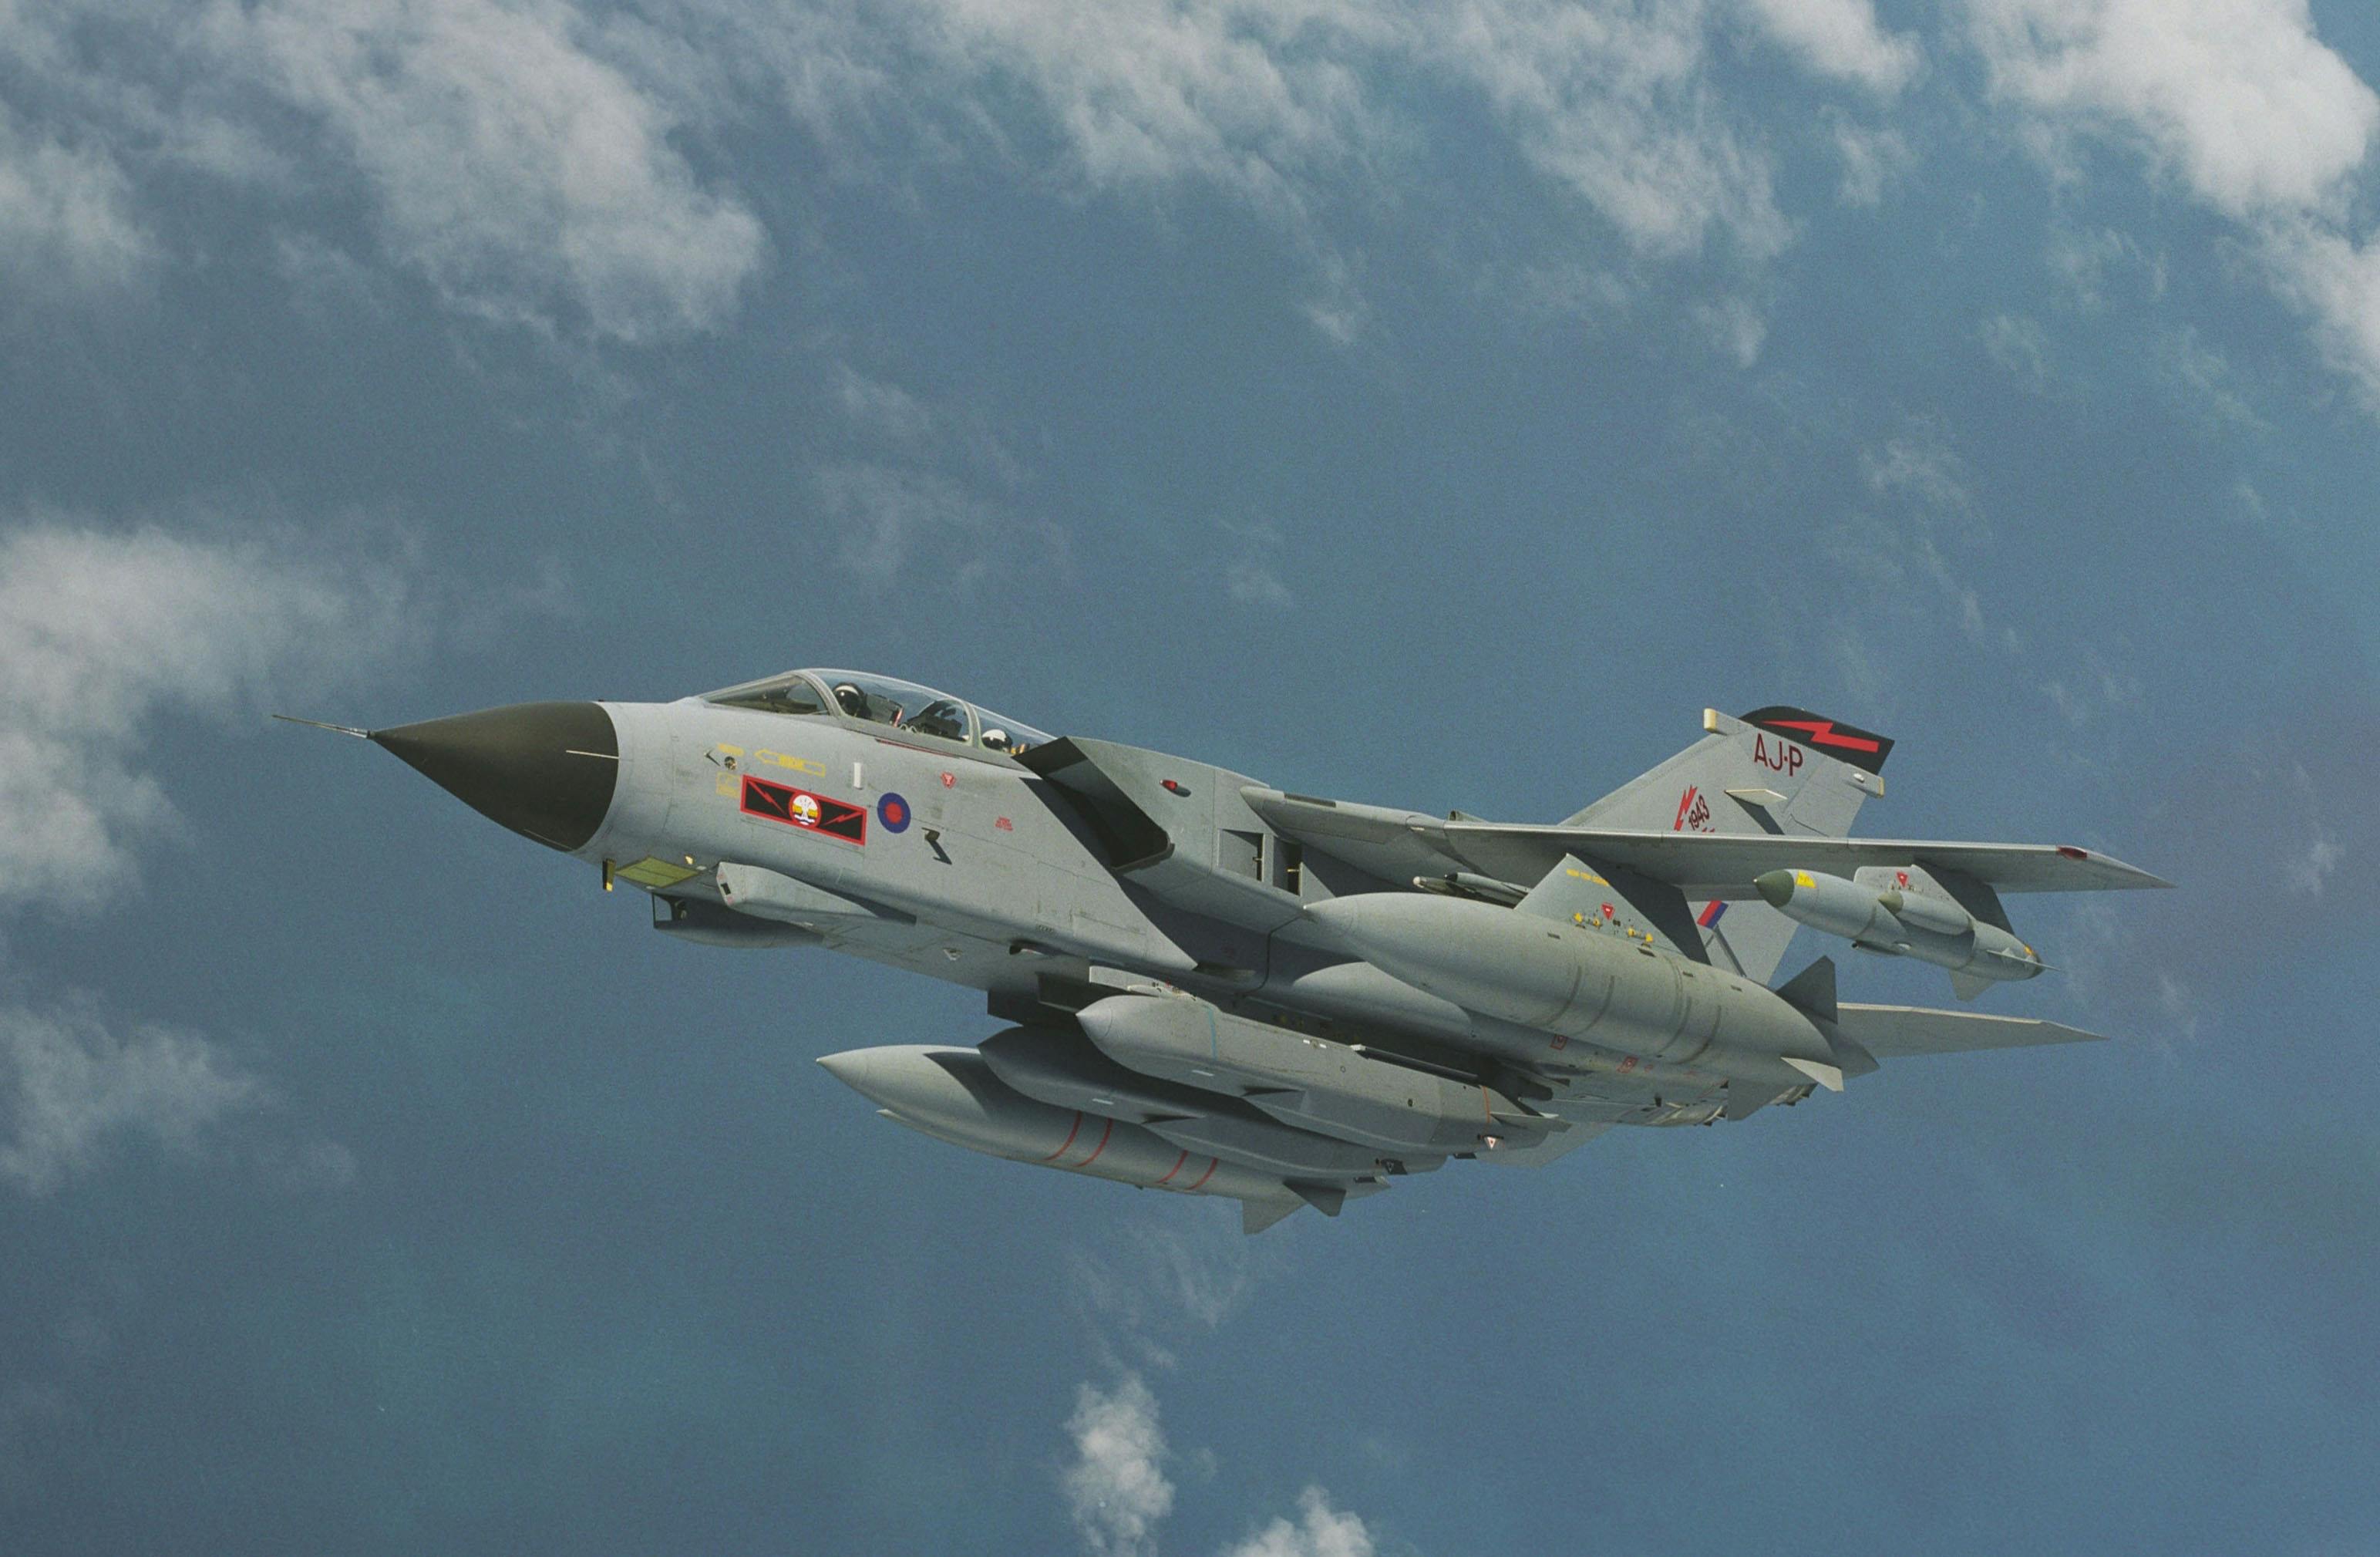 The Storm Shadow Cruise Missile